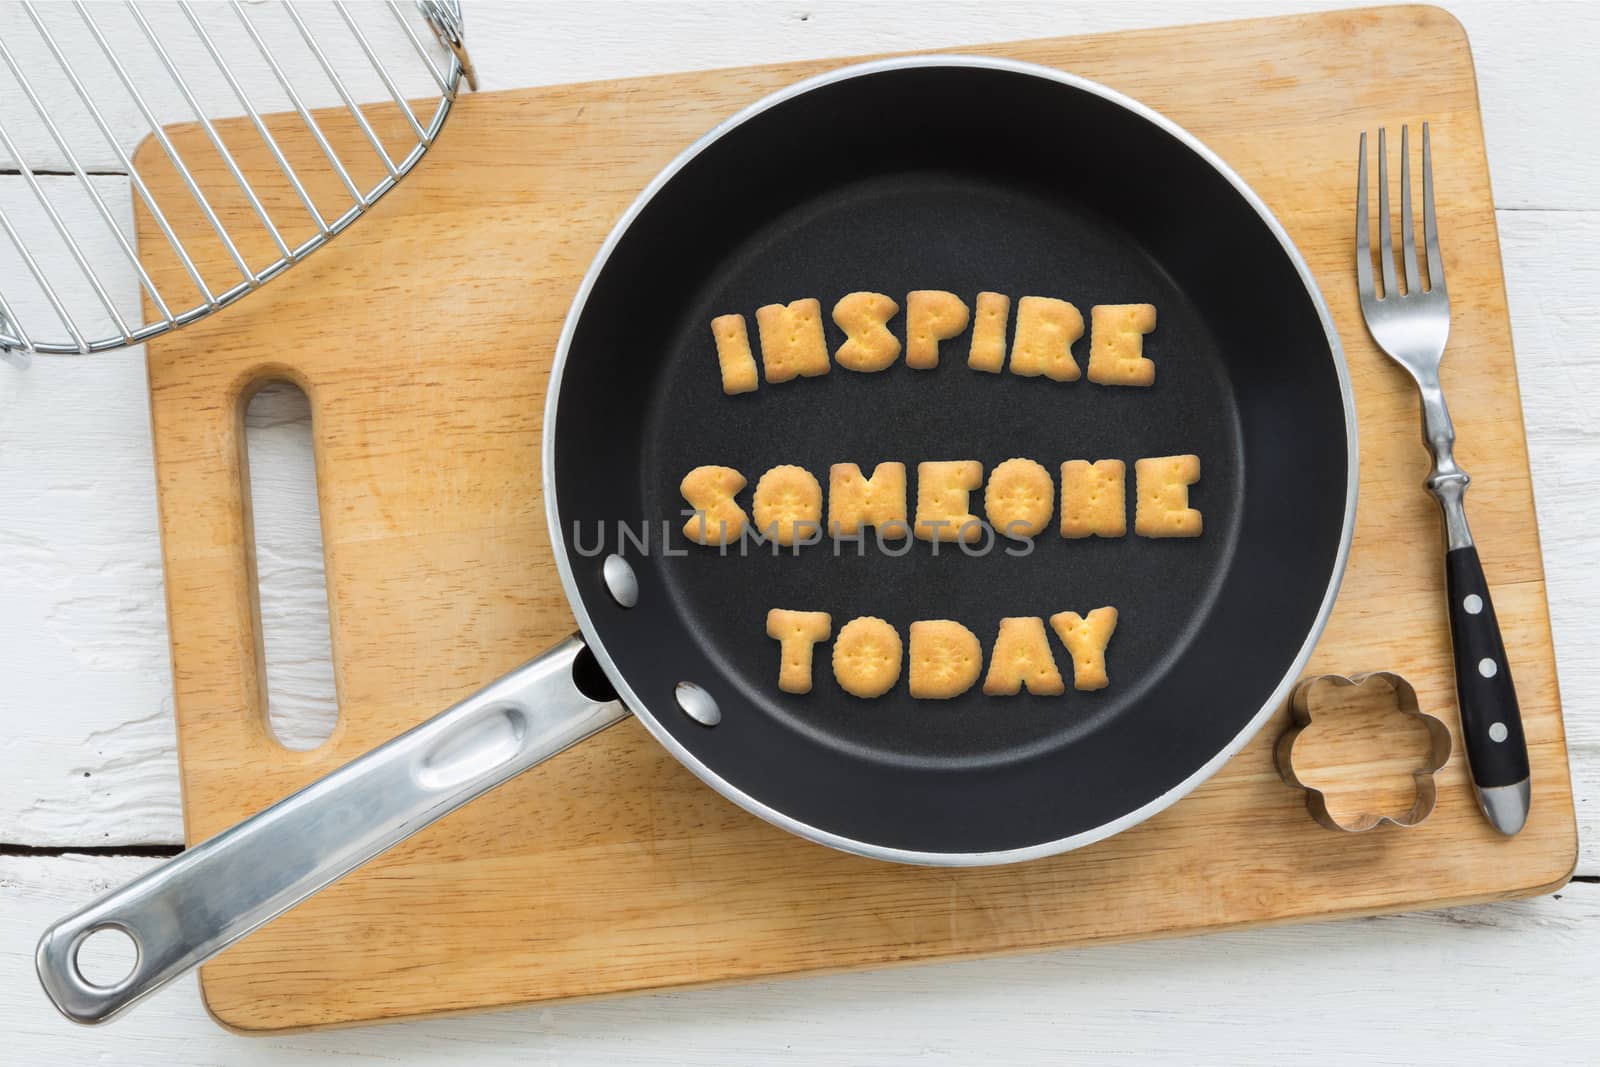 Letter cookies quote INSPIRE SOMEONE TODAY and kitchen utensils by vinnstock